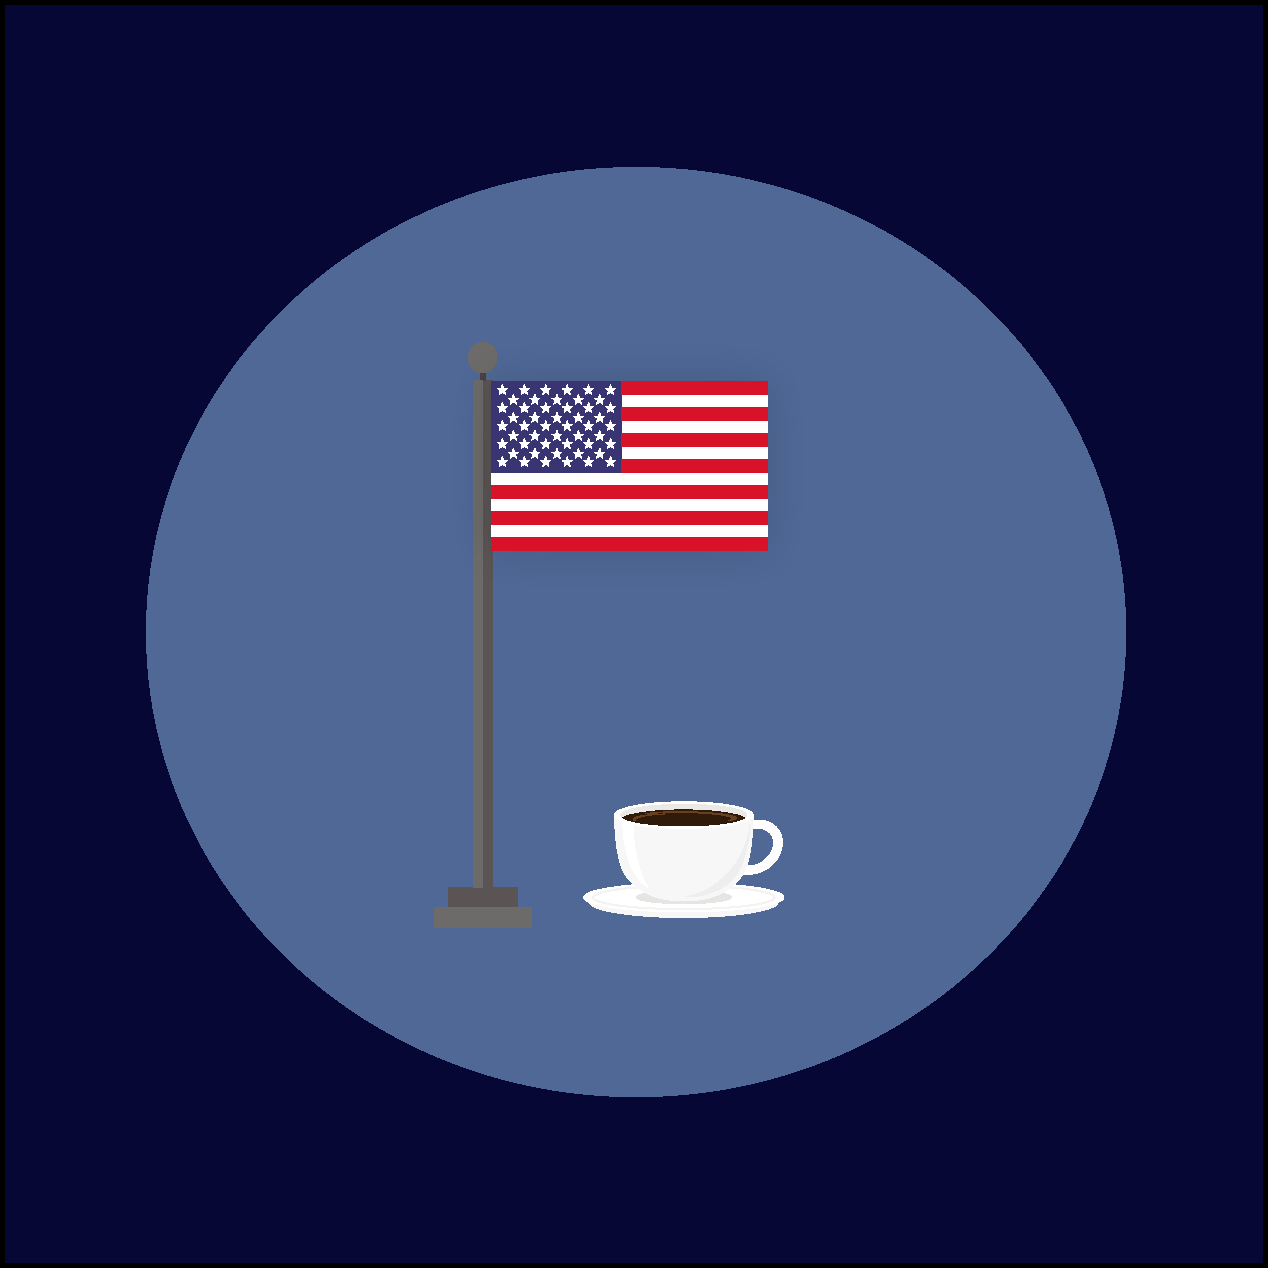 Our team spent 300+ hours on research. Here’s what we learned about coffee statistics in the USA